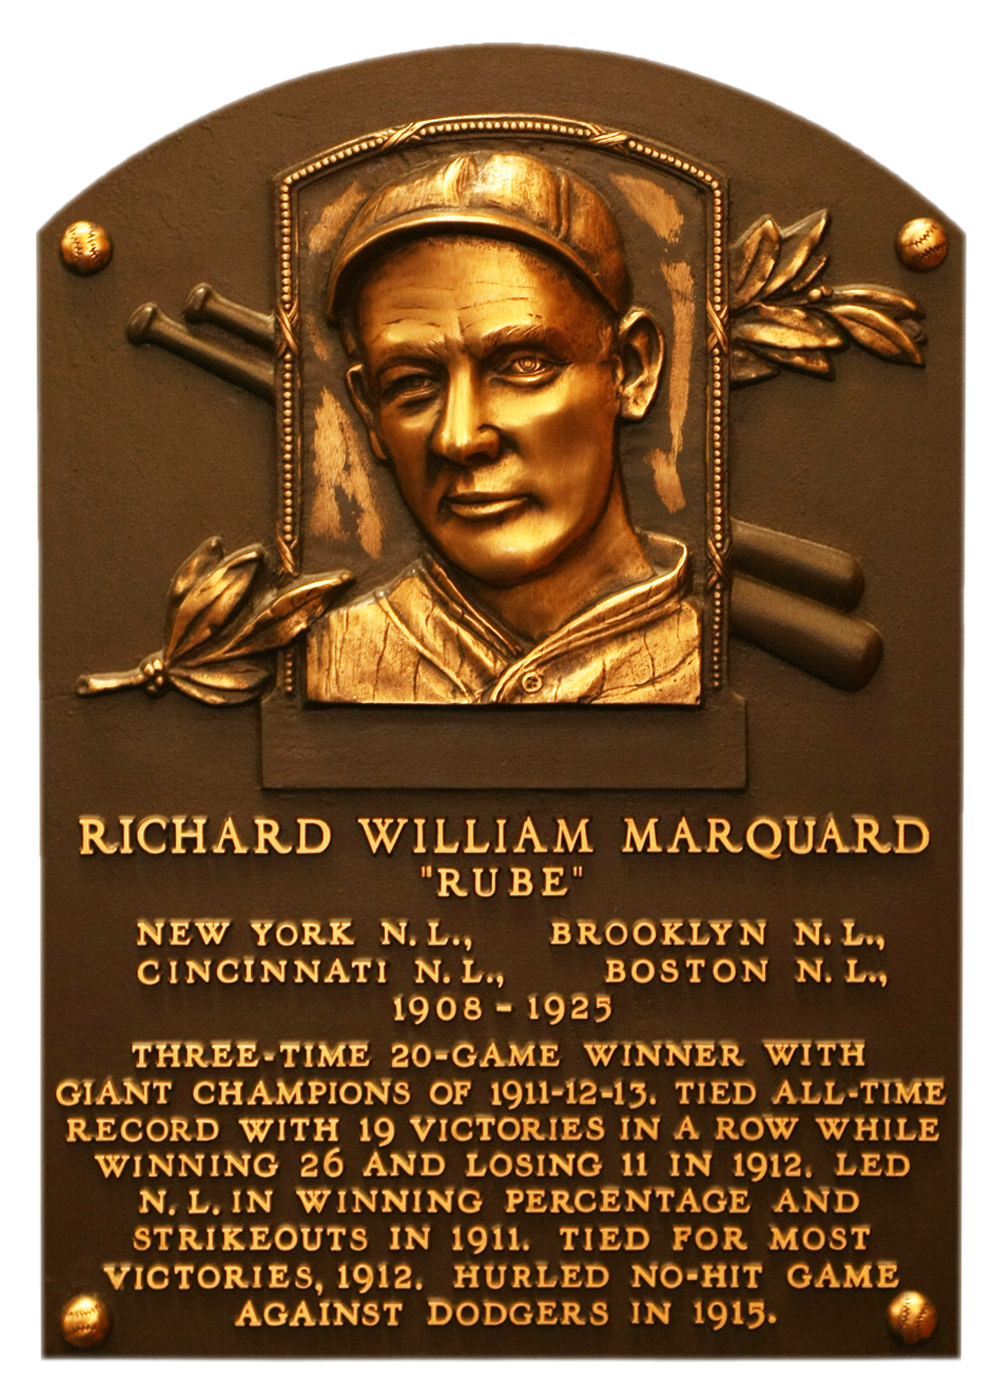 Rube Marquard Hall of Fame plaque